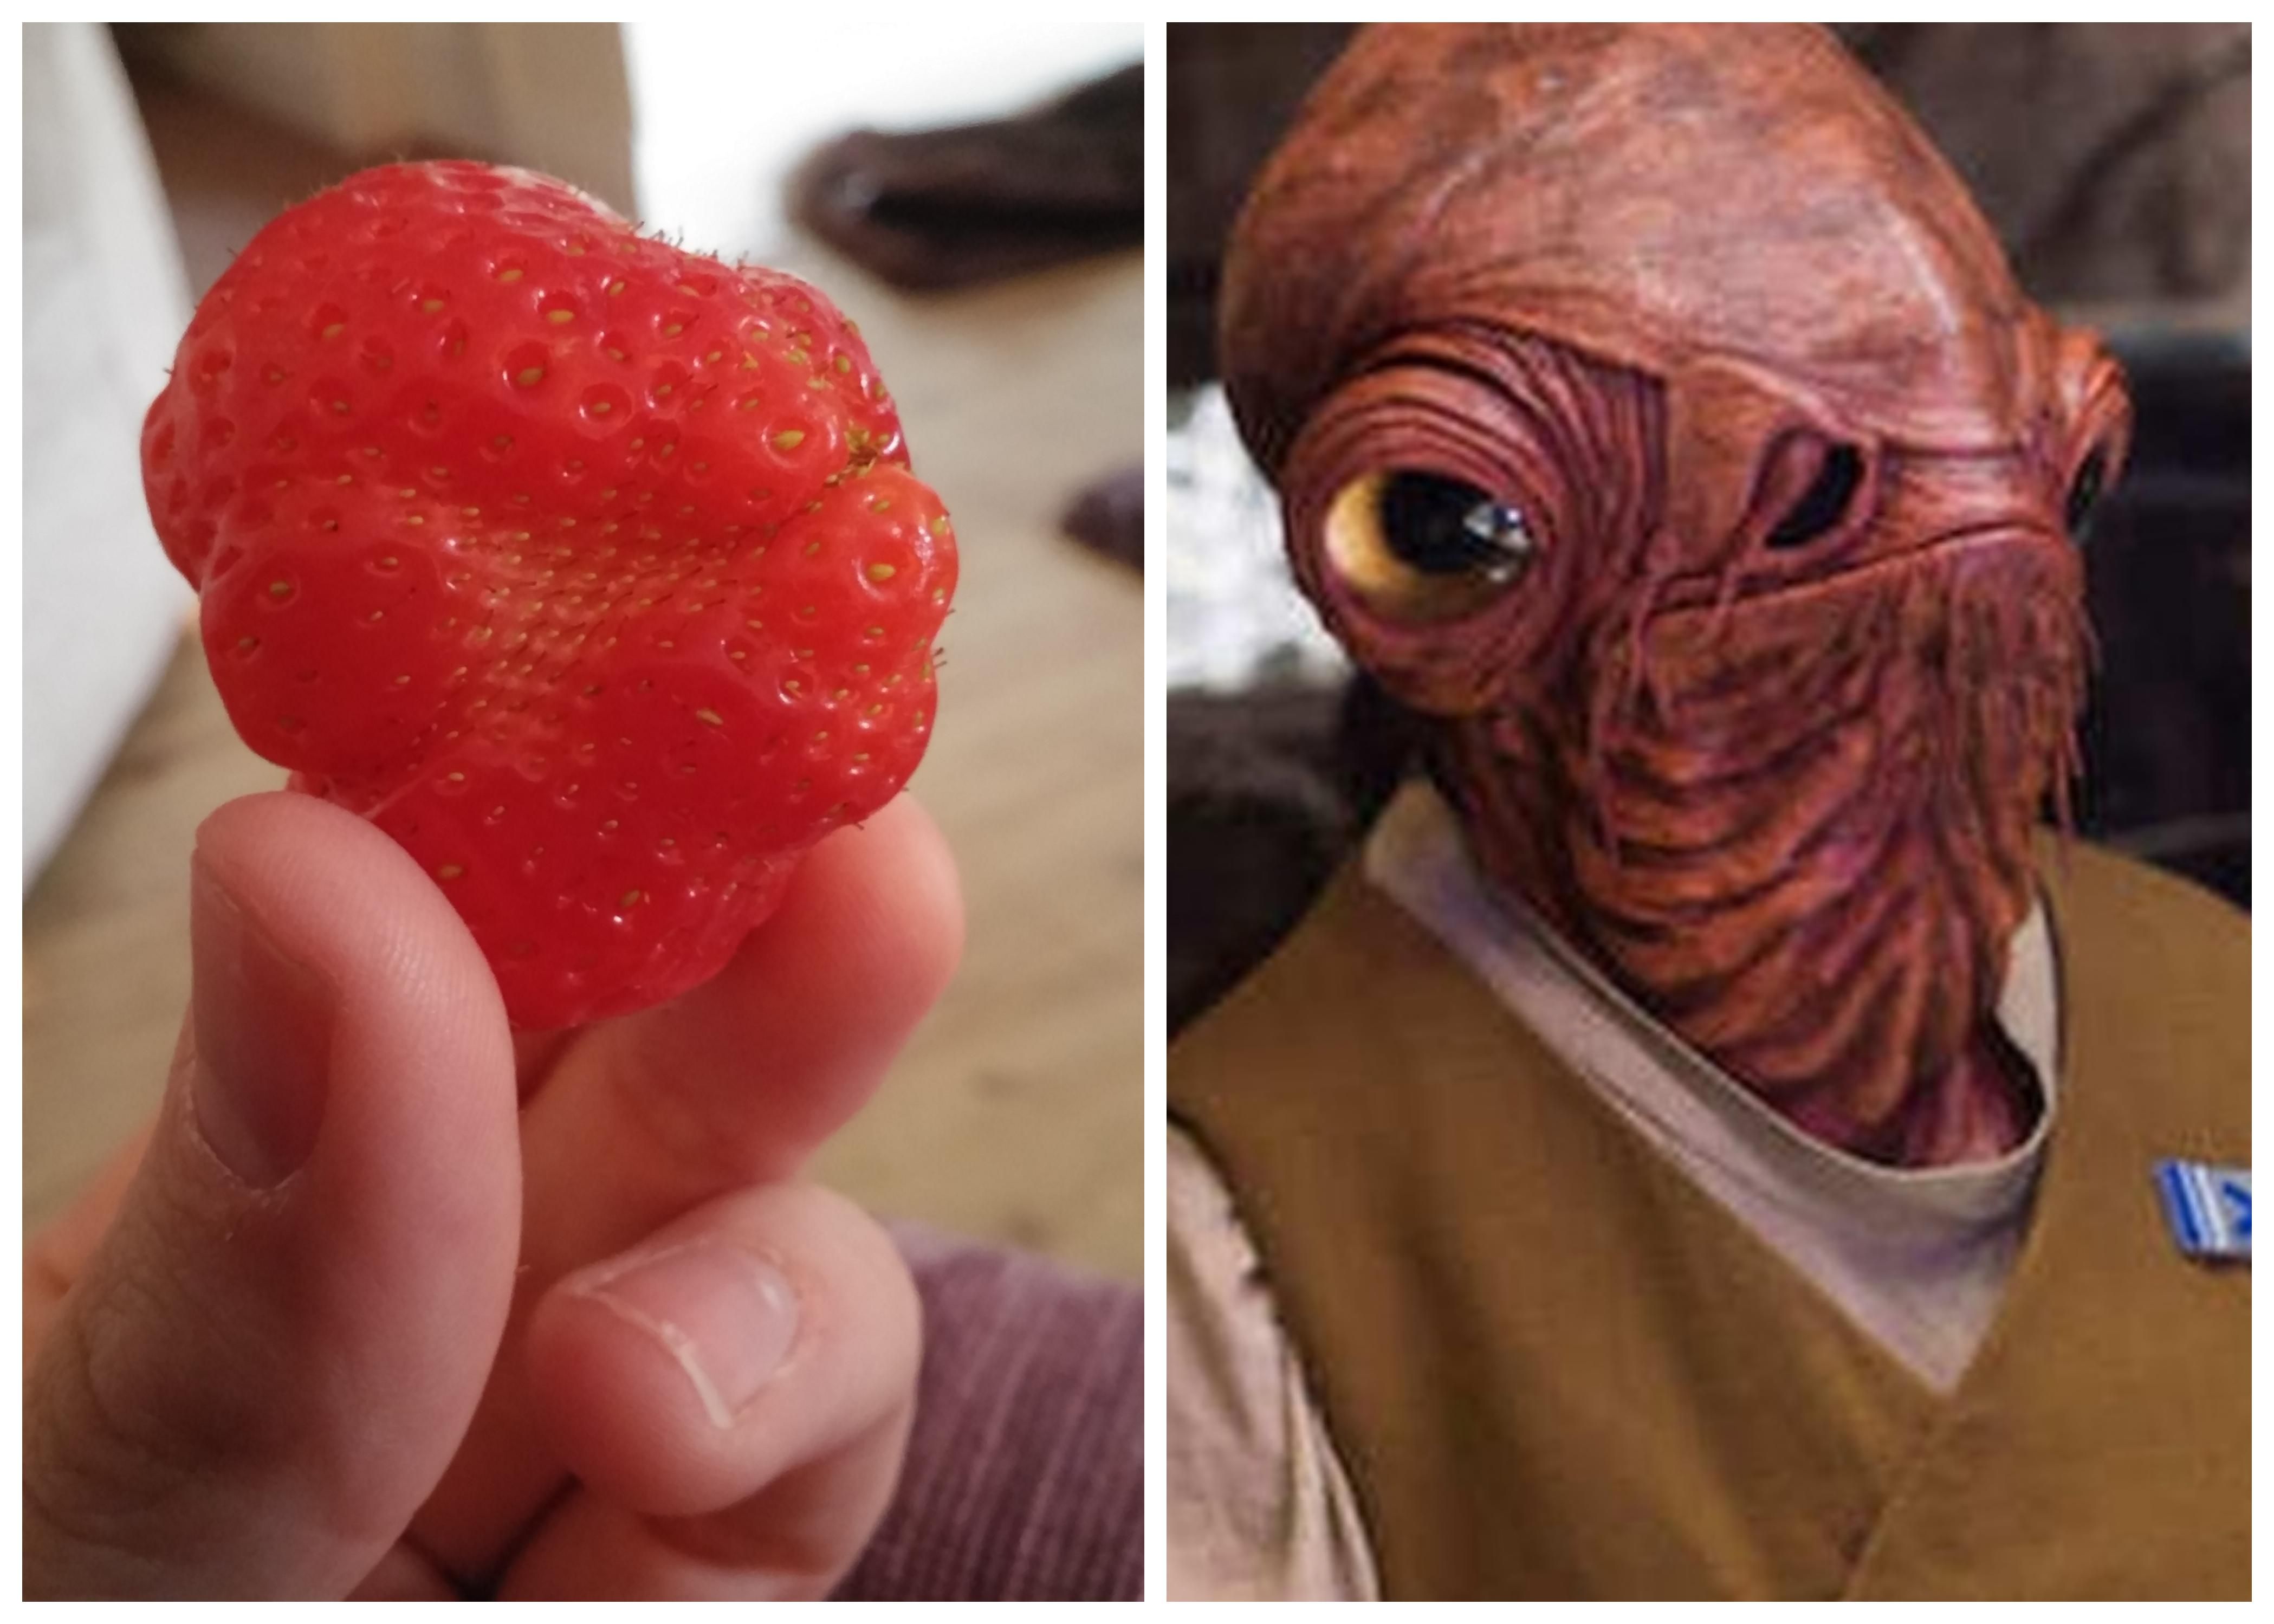 Admiral Ackbar's Strawberry. Naturally, I did not eat it.